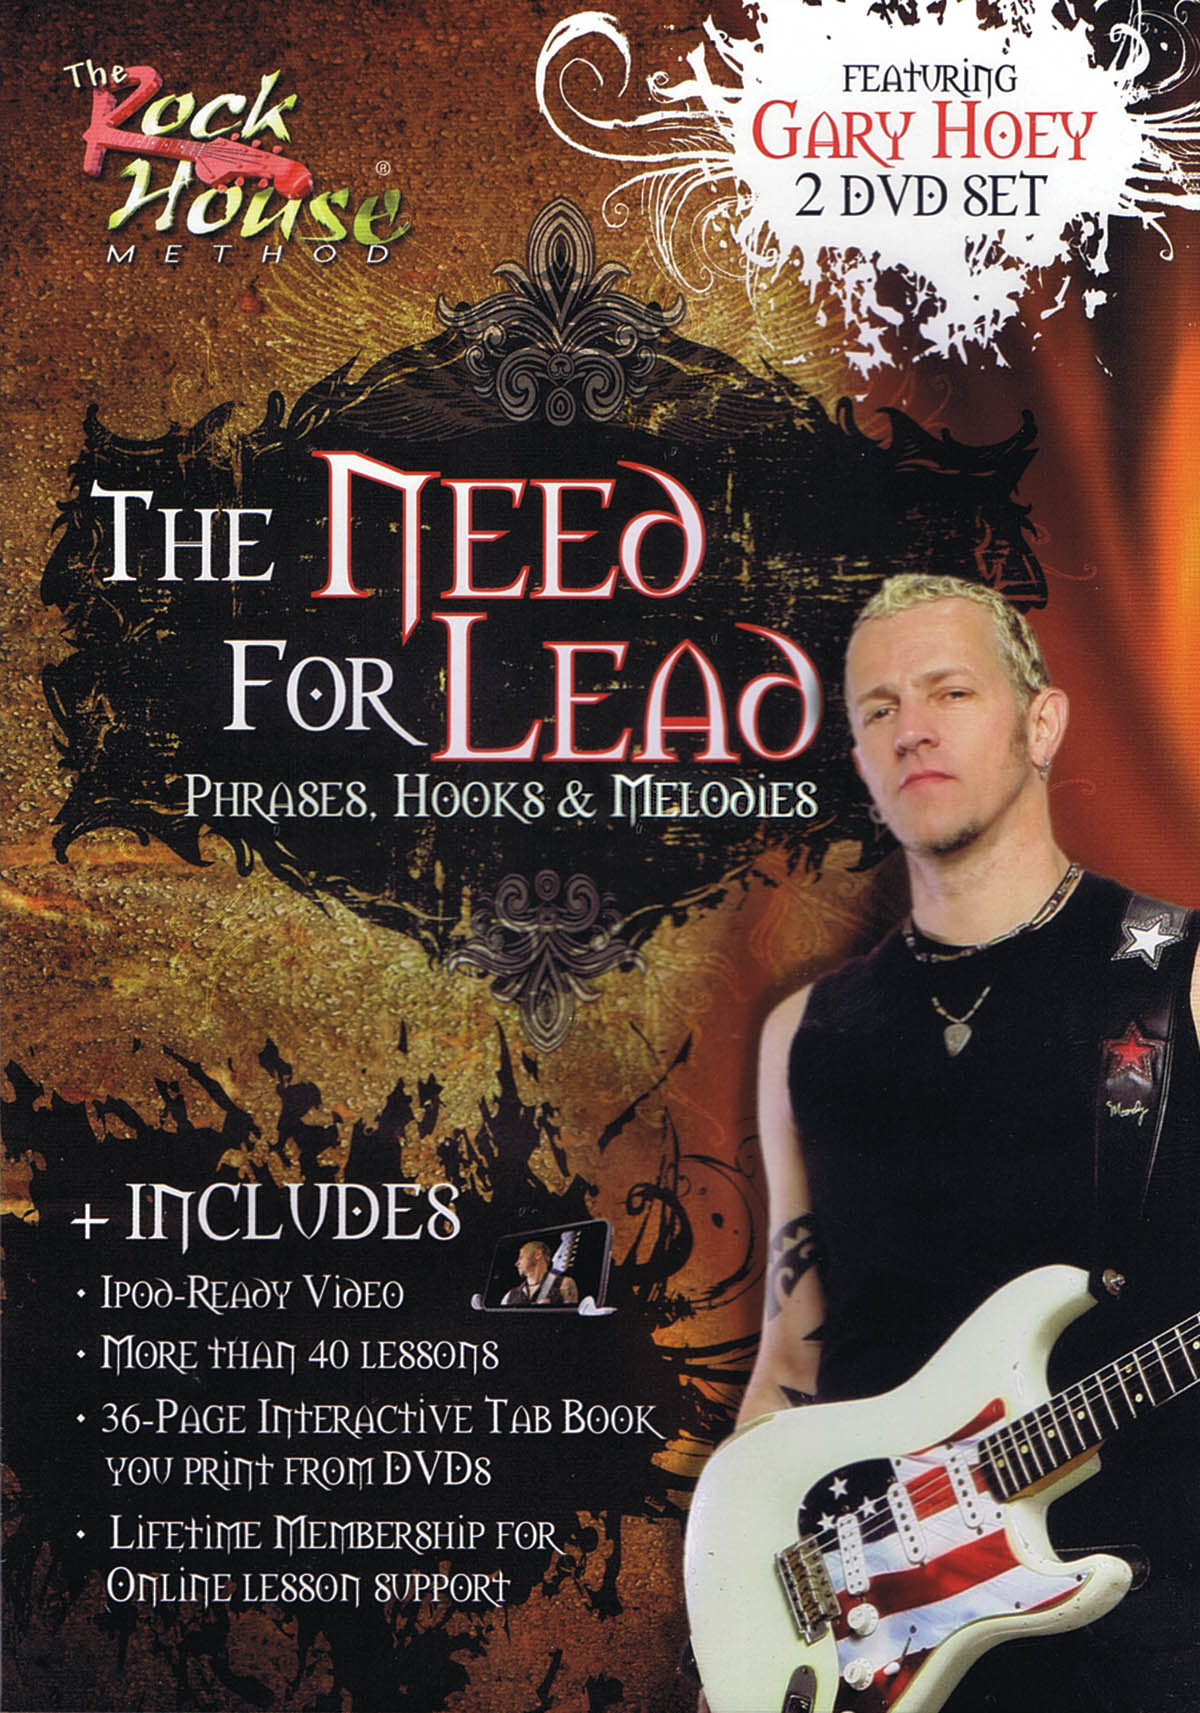 Gary Hoey - The Need fuer Lead